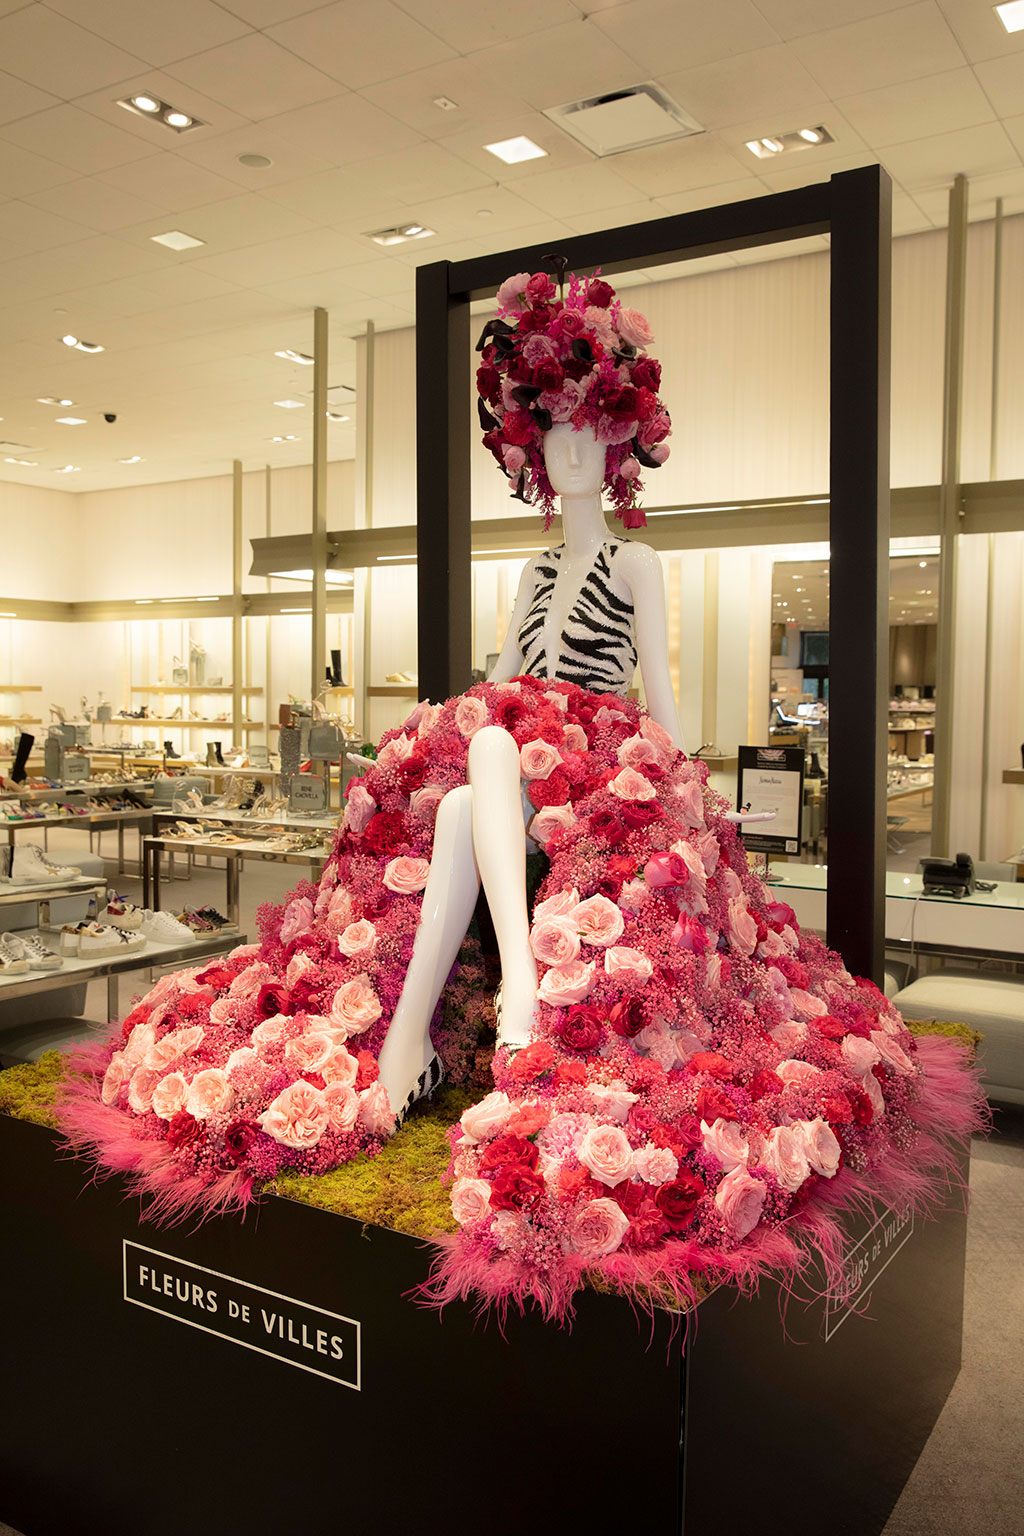 Neiman Marcus Mannequin Created by Aniska Creations. Photo by Theodora Richter